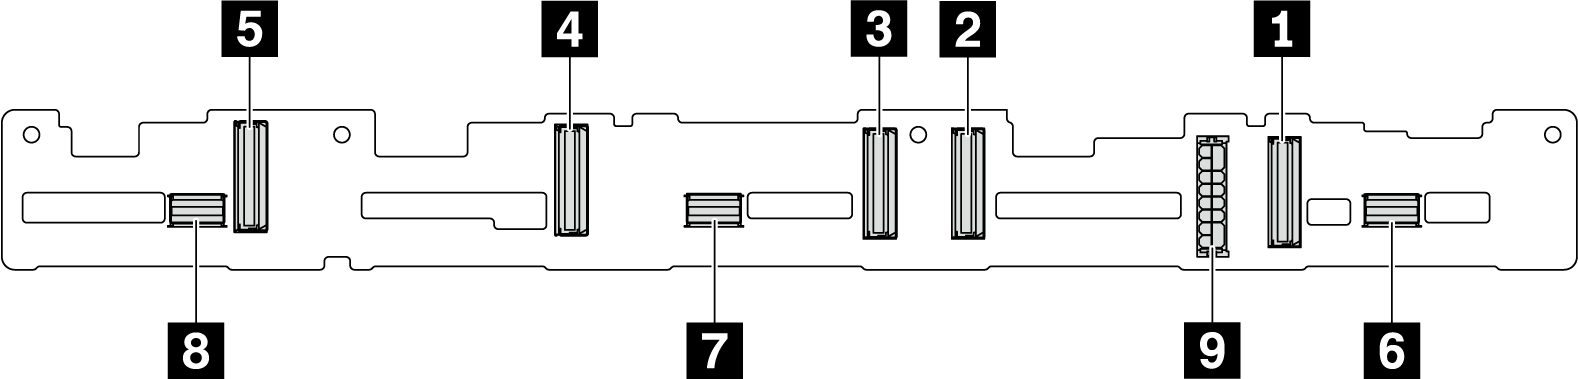 Connectors on the backplane for ten 2.5-inch SAS/SATA/NVMe drives